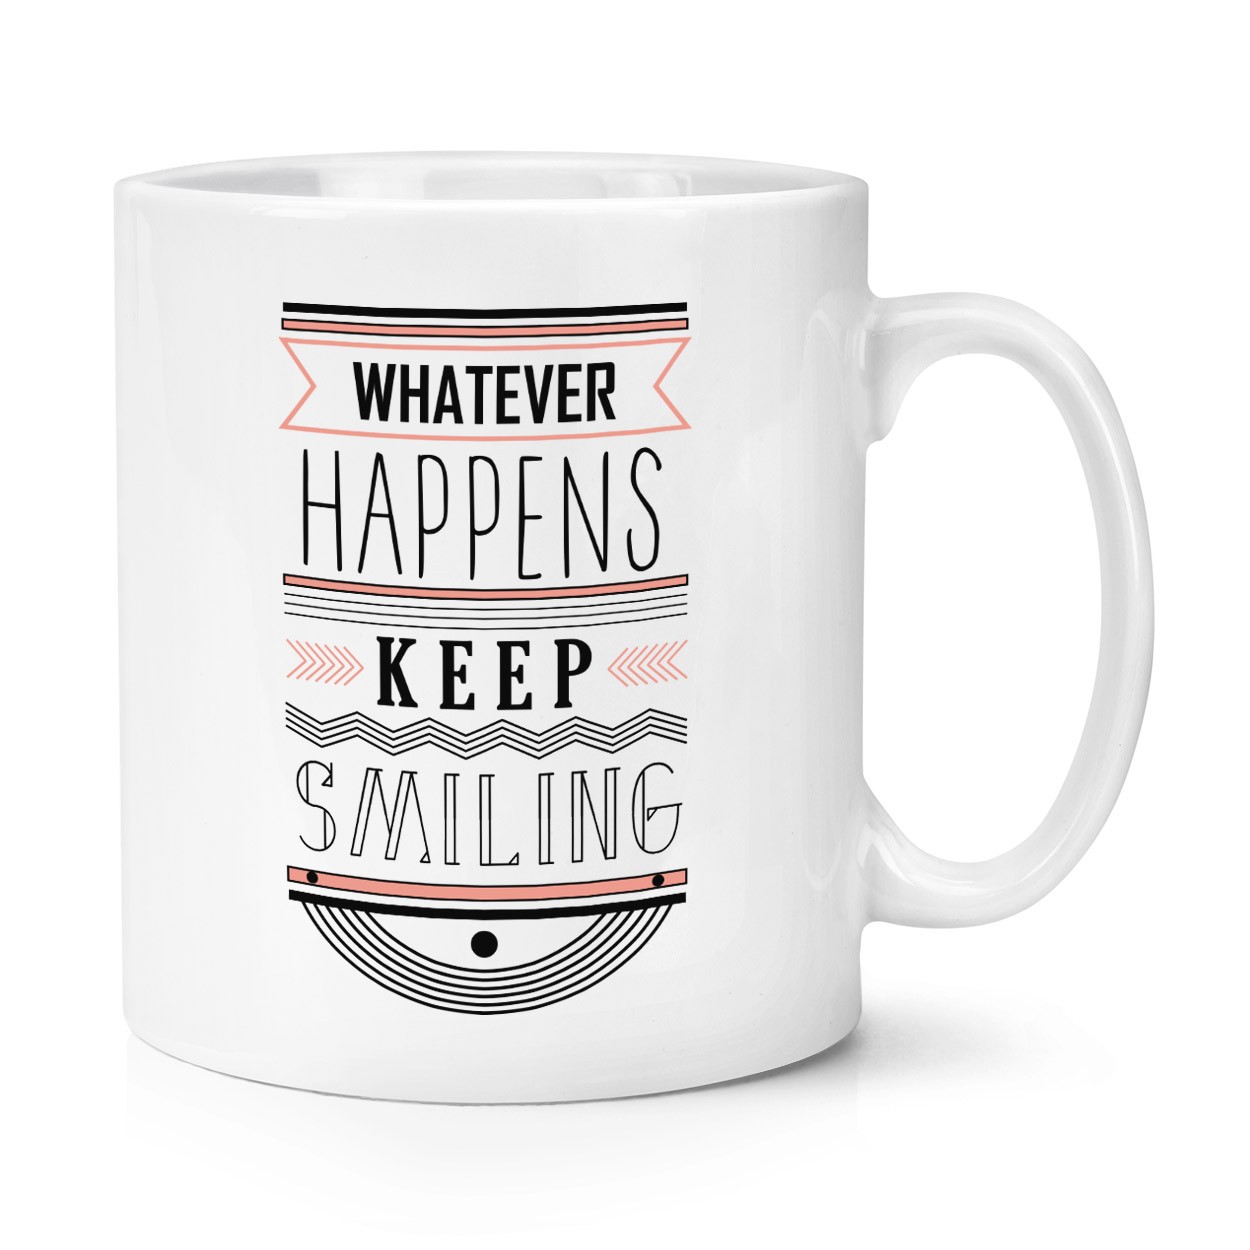 Whatever Happens Keep Smiling Quote 10oz Mug Cup